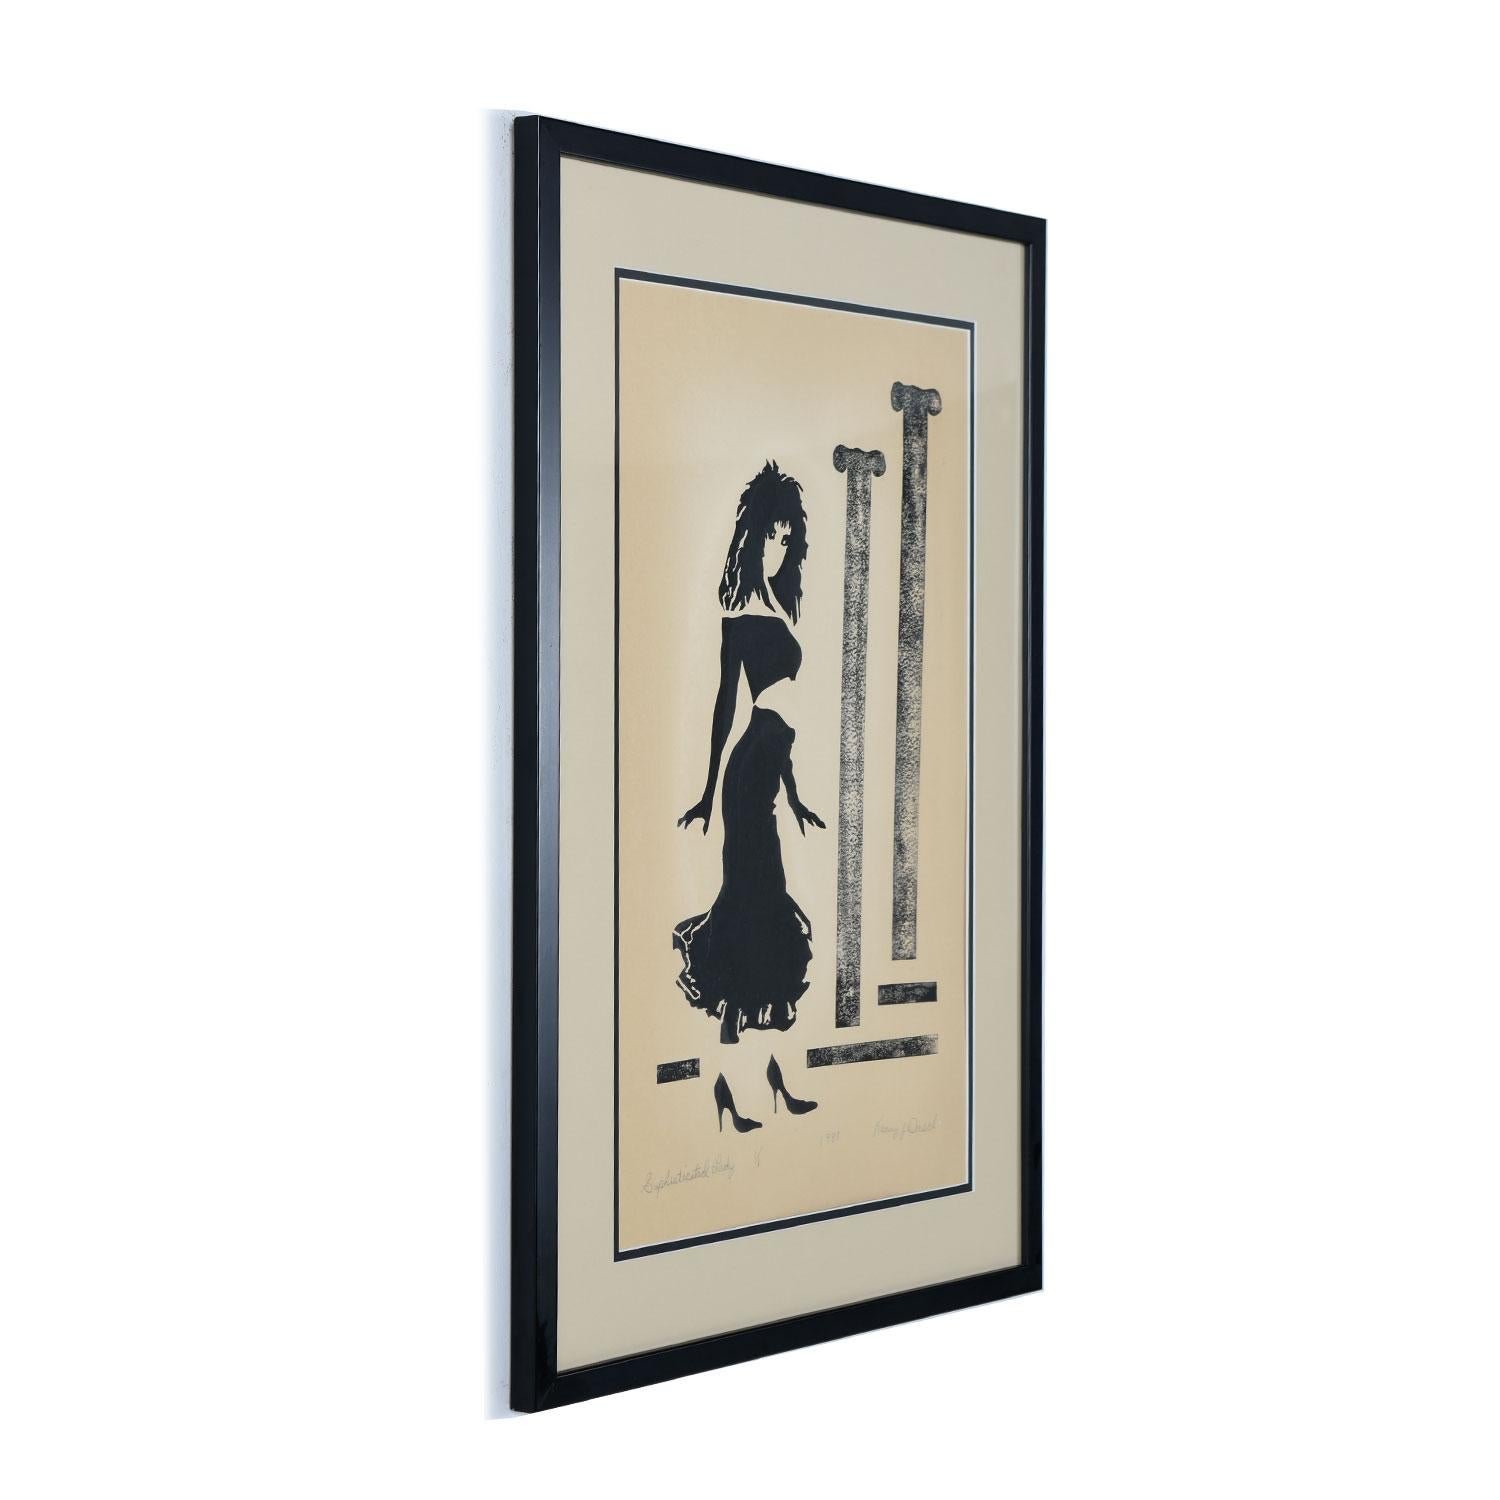 This vintage 1988 pencil signed serigraph, “Sophisticated Lady,” perfectly captures the spirit of the divine feminine. The female figure stands in bold, self-assured form. She is a woman who is comfortable in her sexuality as exhibited by her